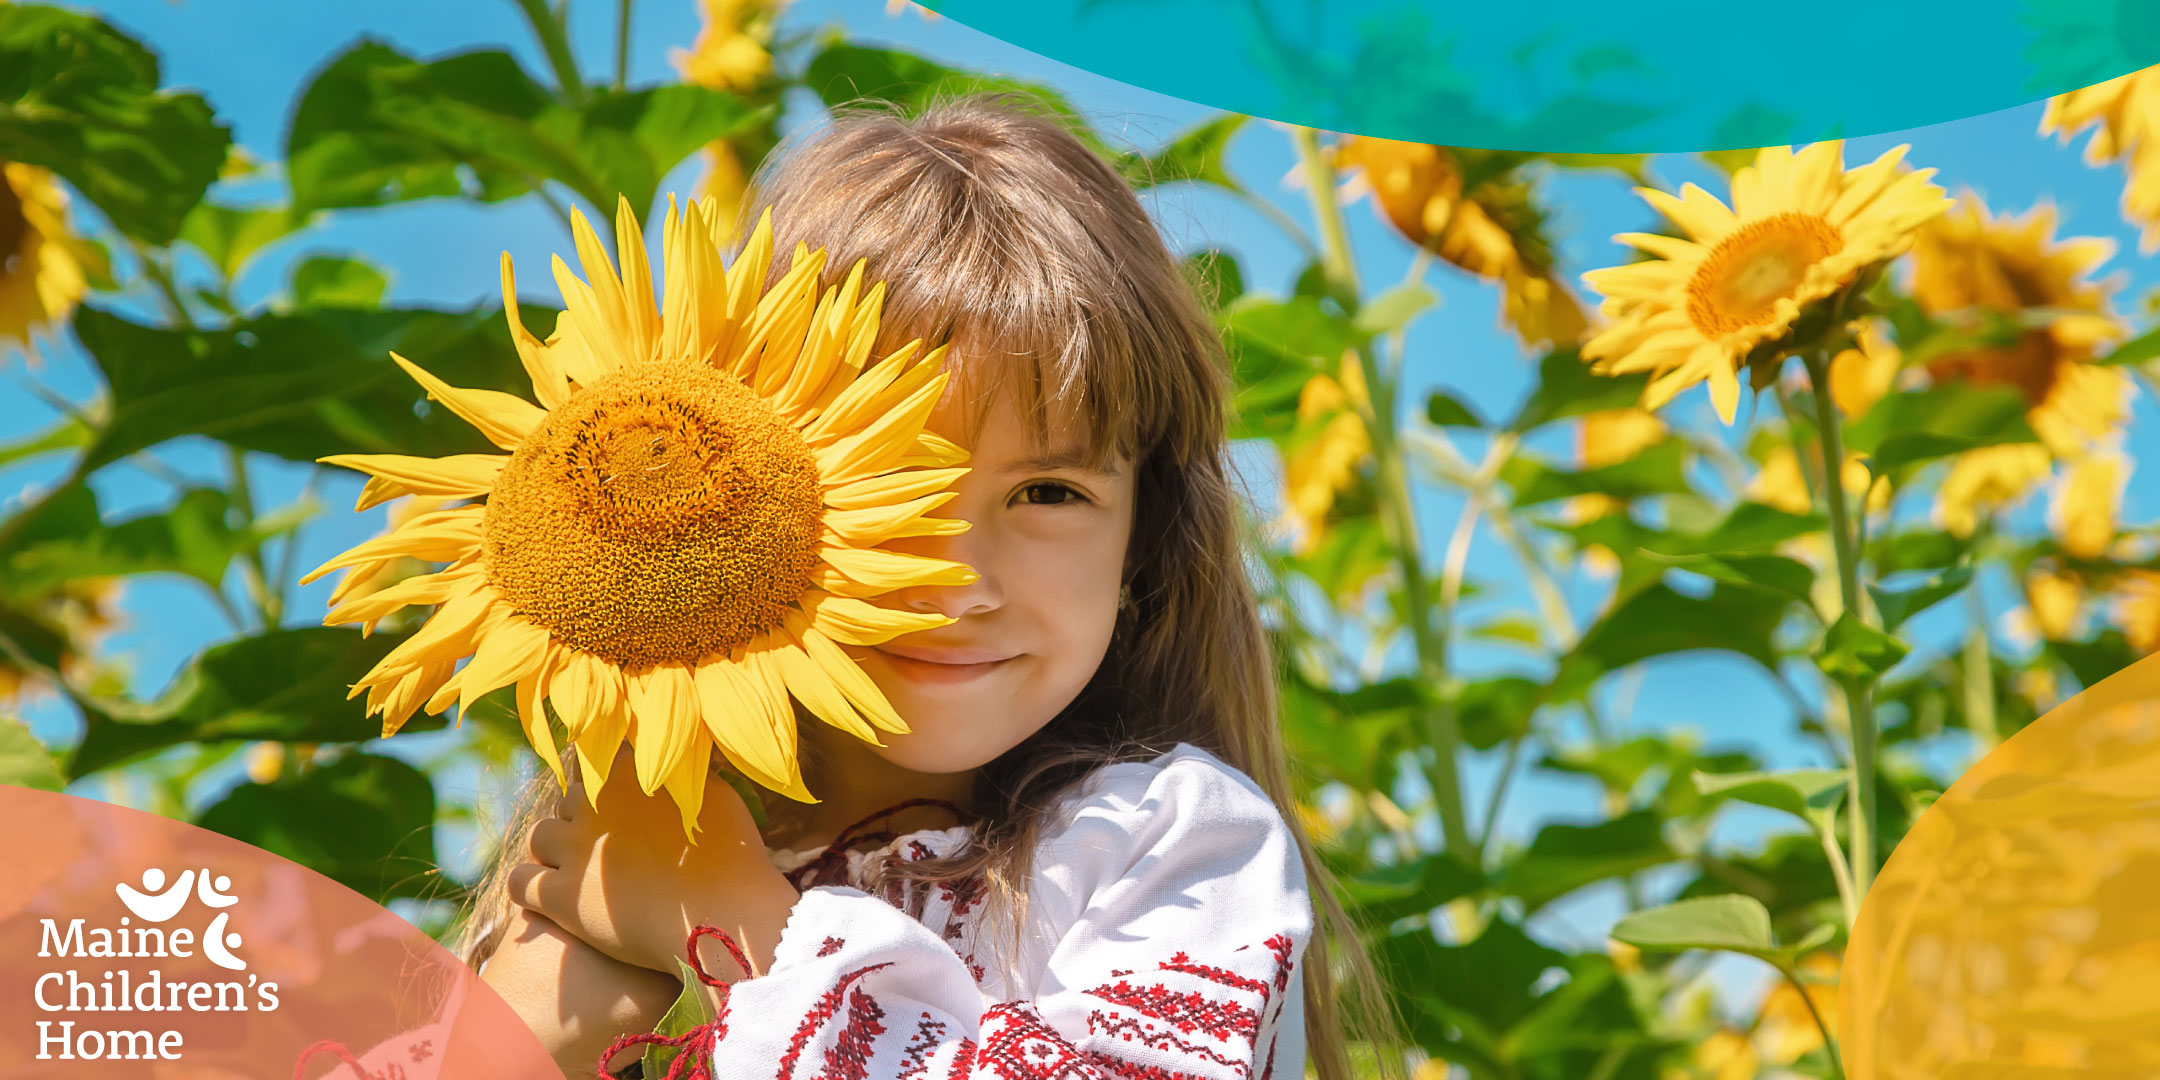 A child smiles in a field of sunflowers.